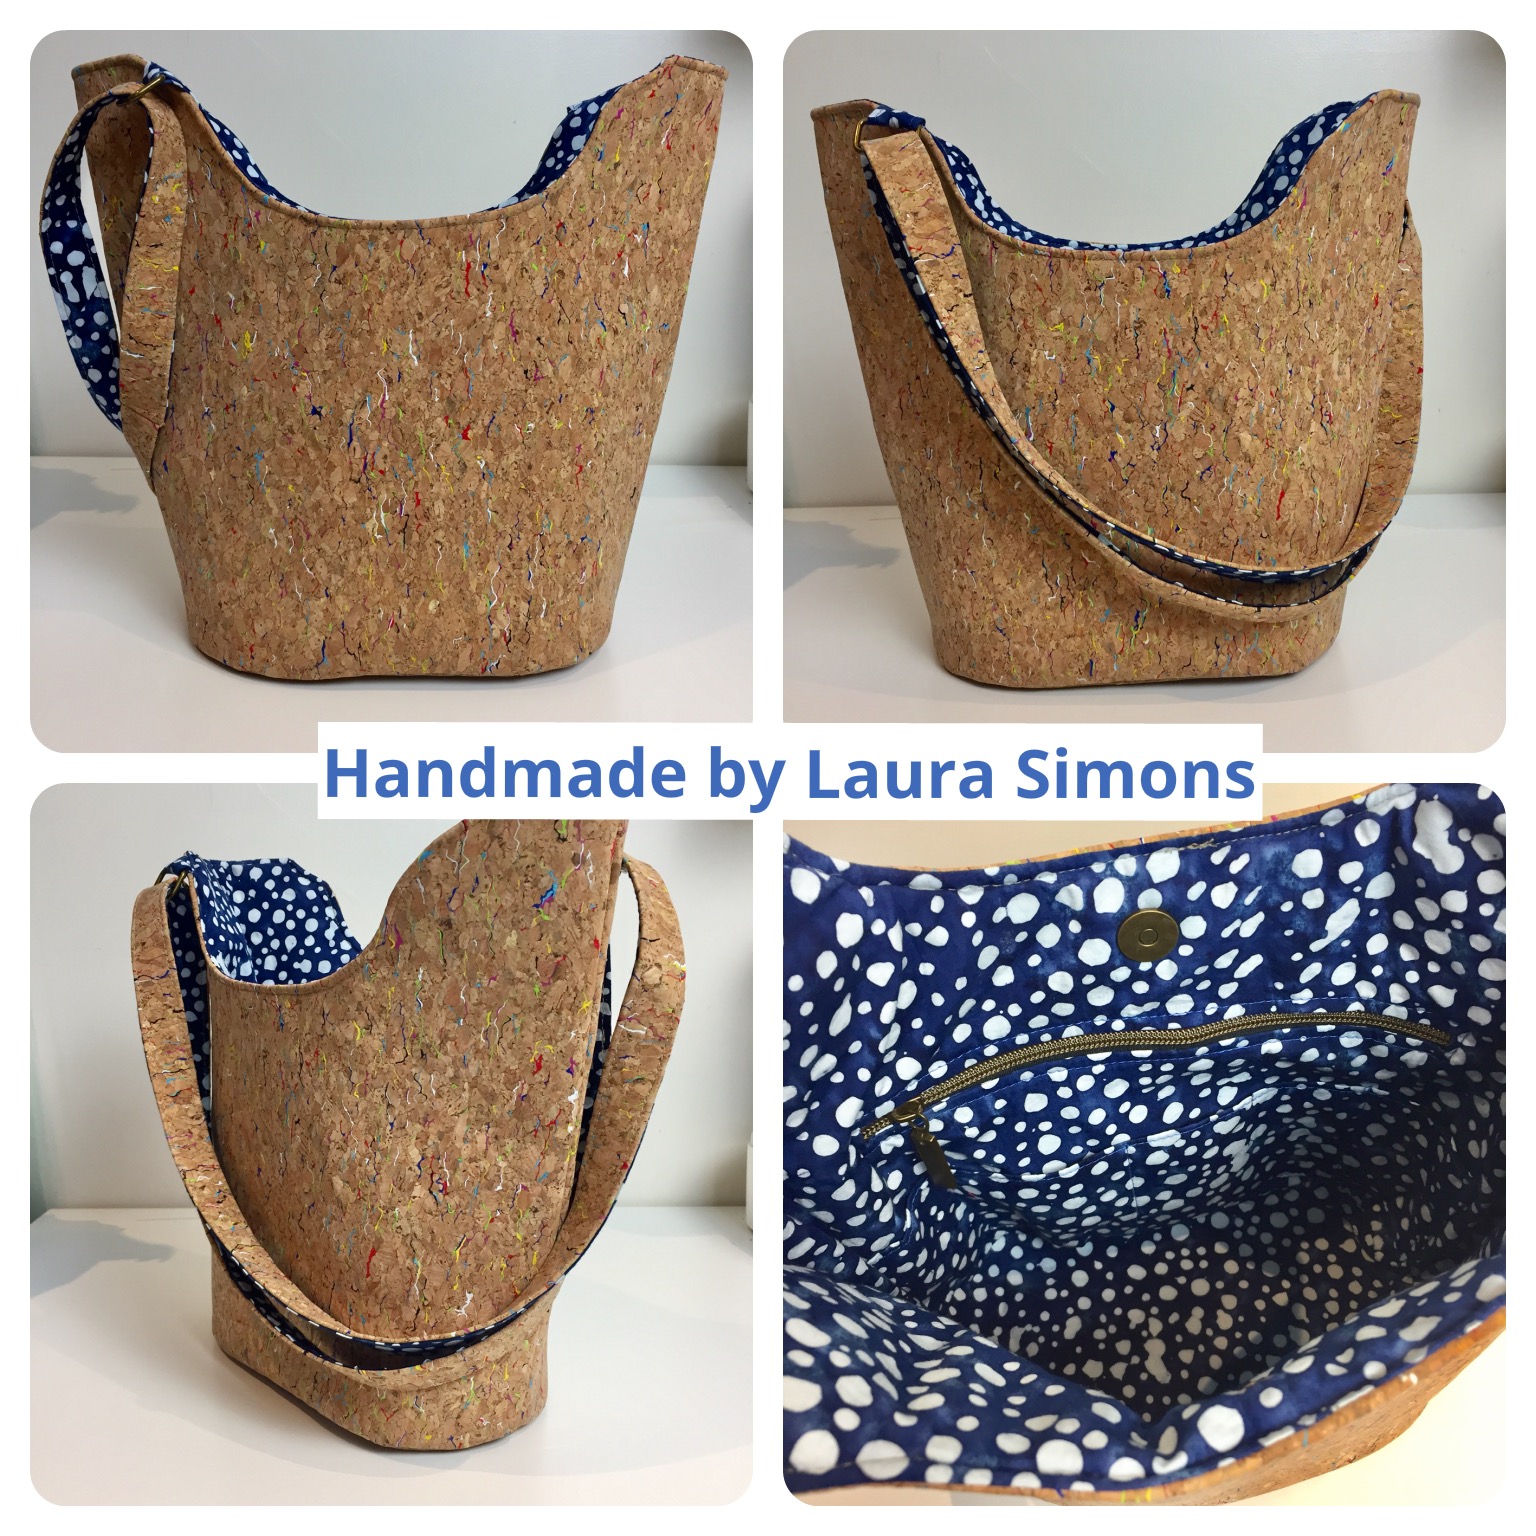 The Bucket Tote, made by Handmade by Laura Simons